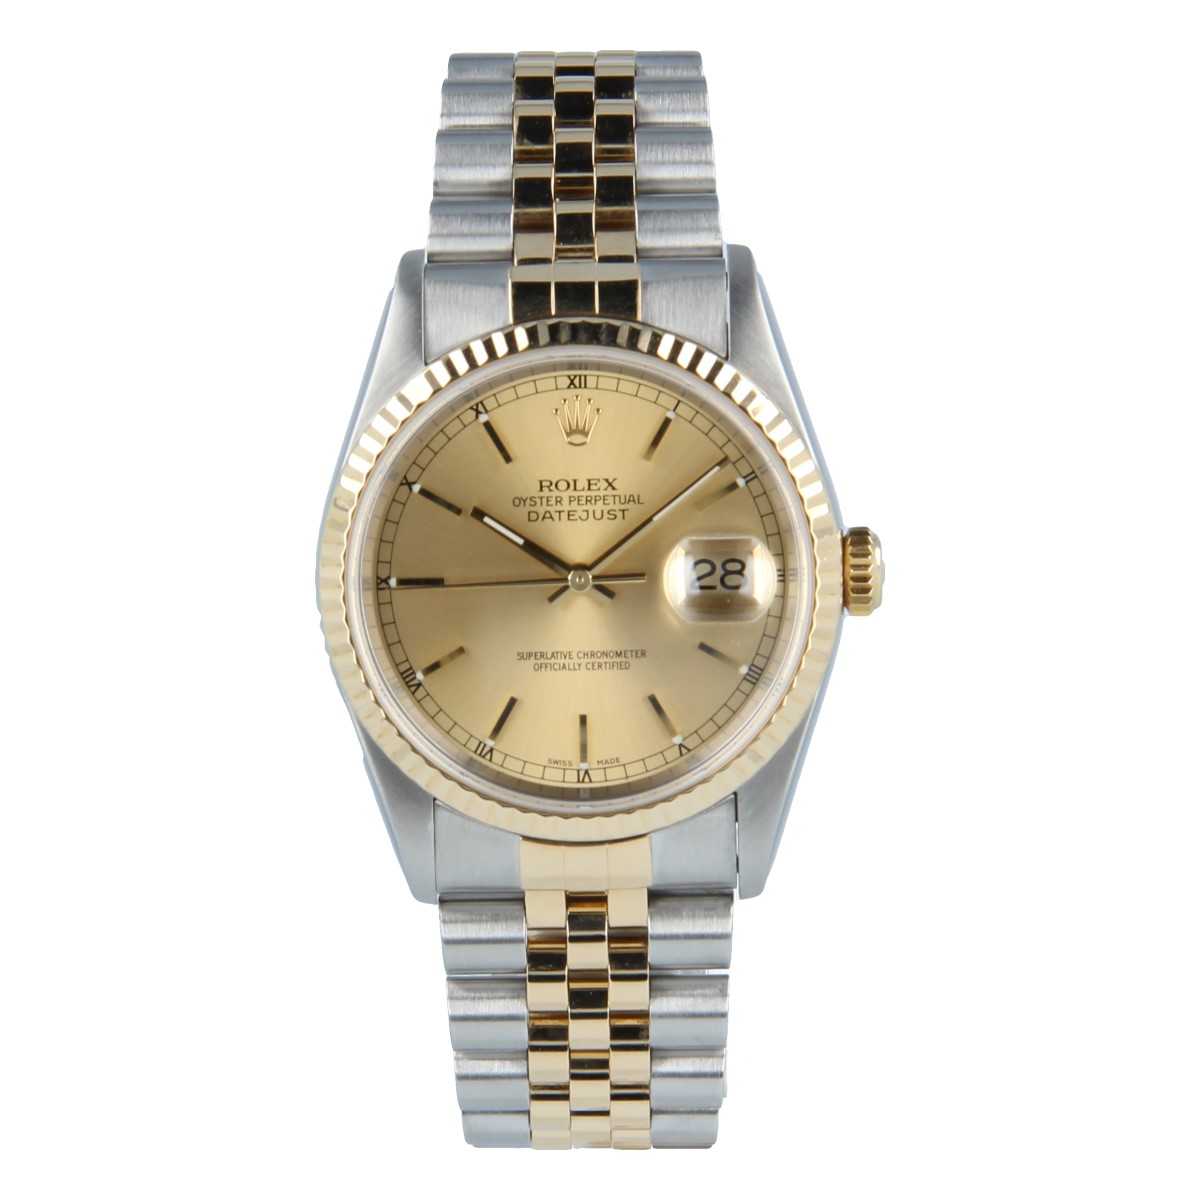 Rolex Datejust 36mm steel and gold 